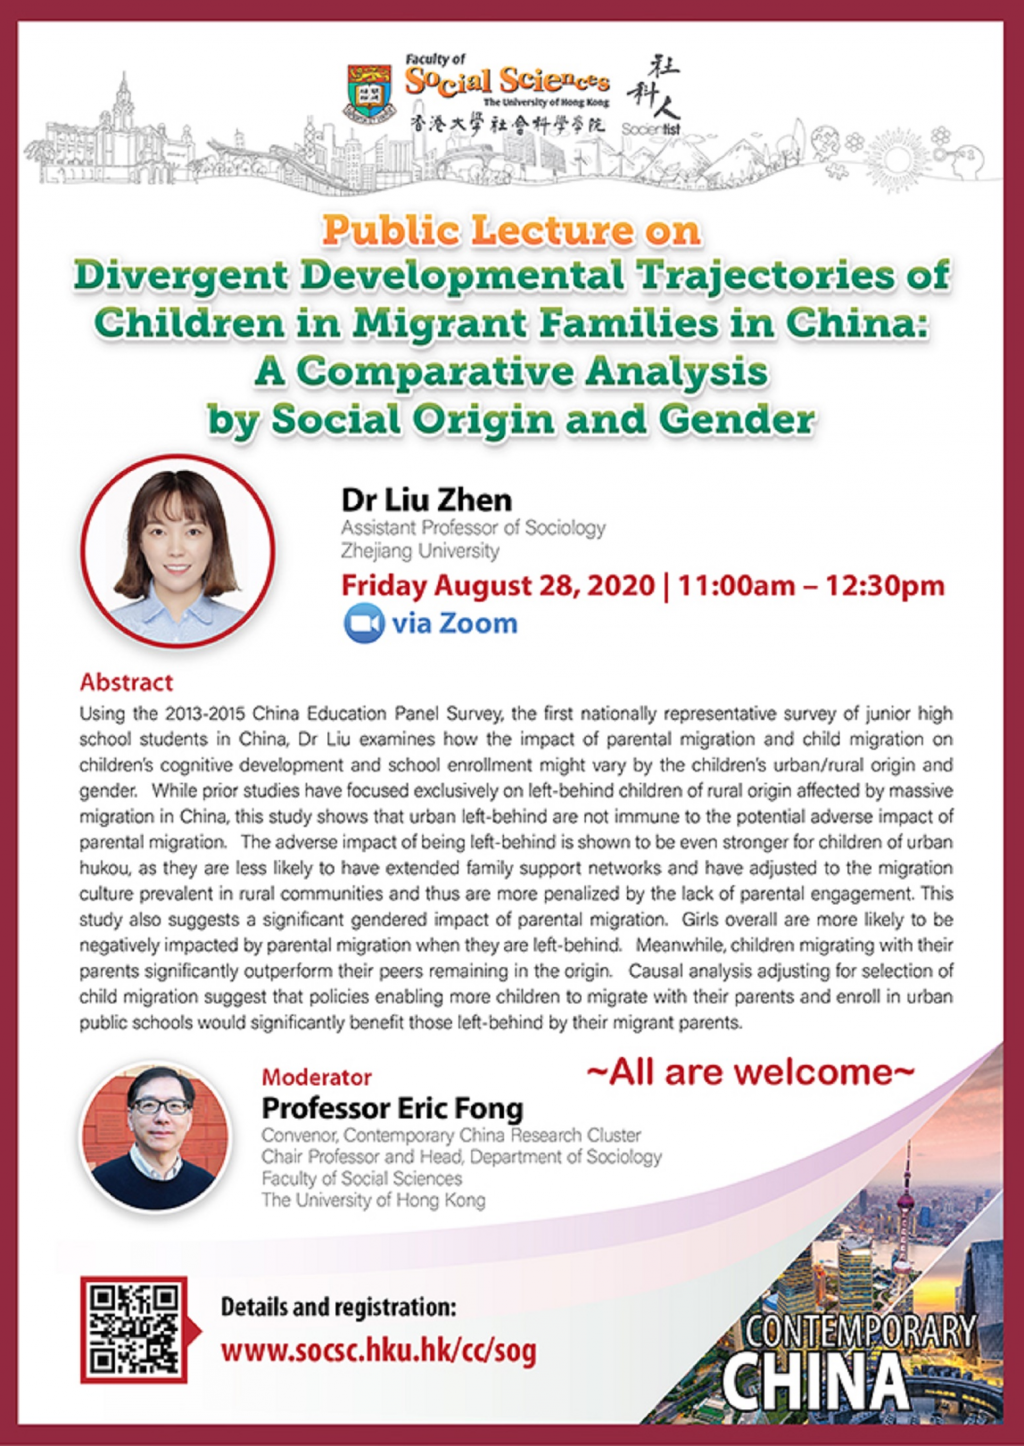 Divergent Developmental Trajectories of Children in Migrant Families in China: A Comparative Analysis by Social Origin and Gender